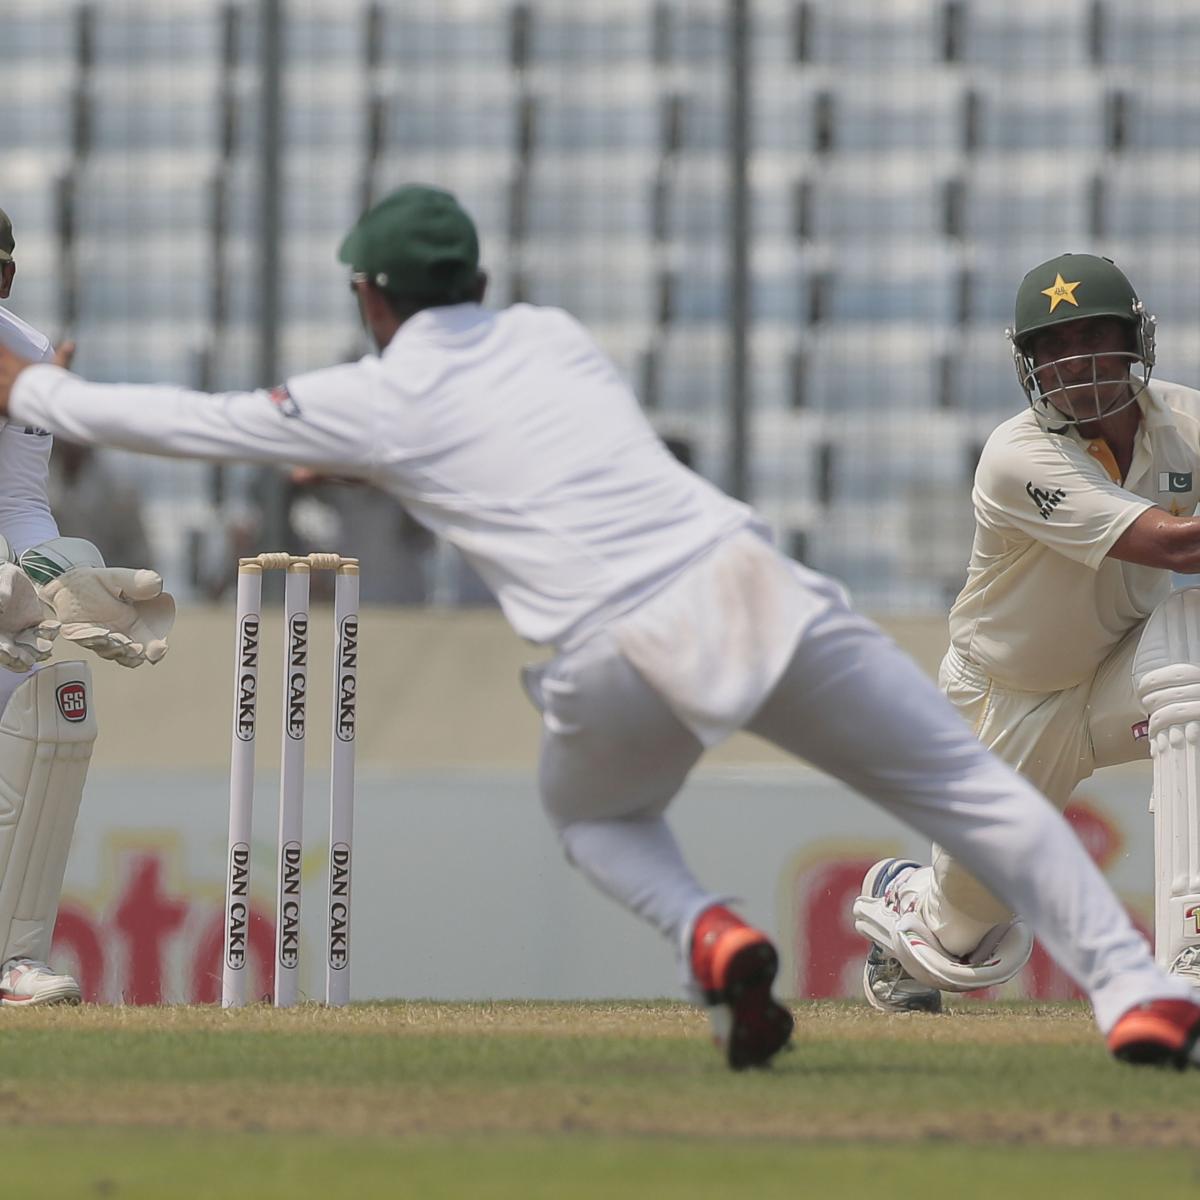 Bangladesh Undermined Against Pakistan by Poor Selection and Worse Luck